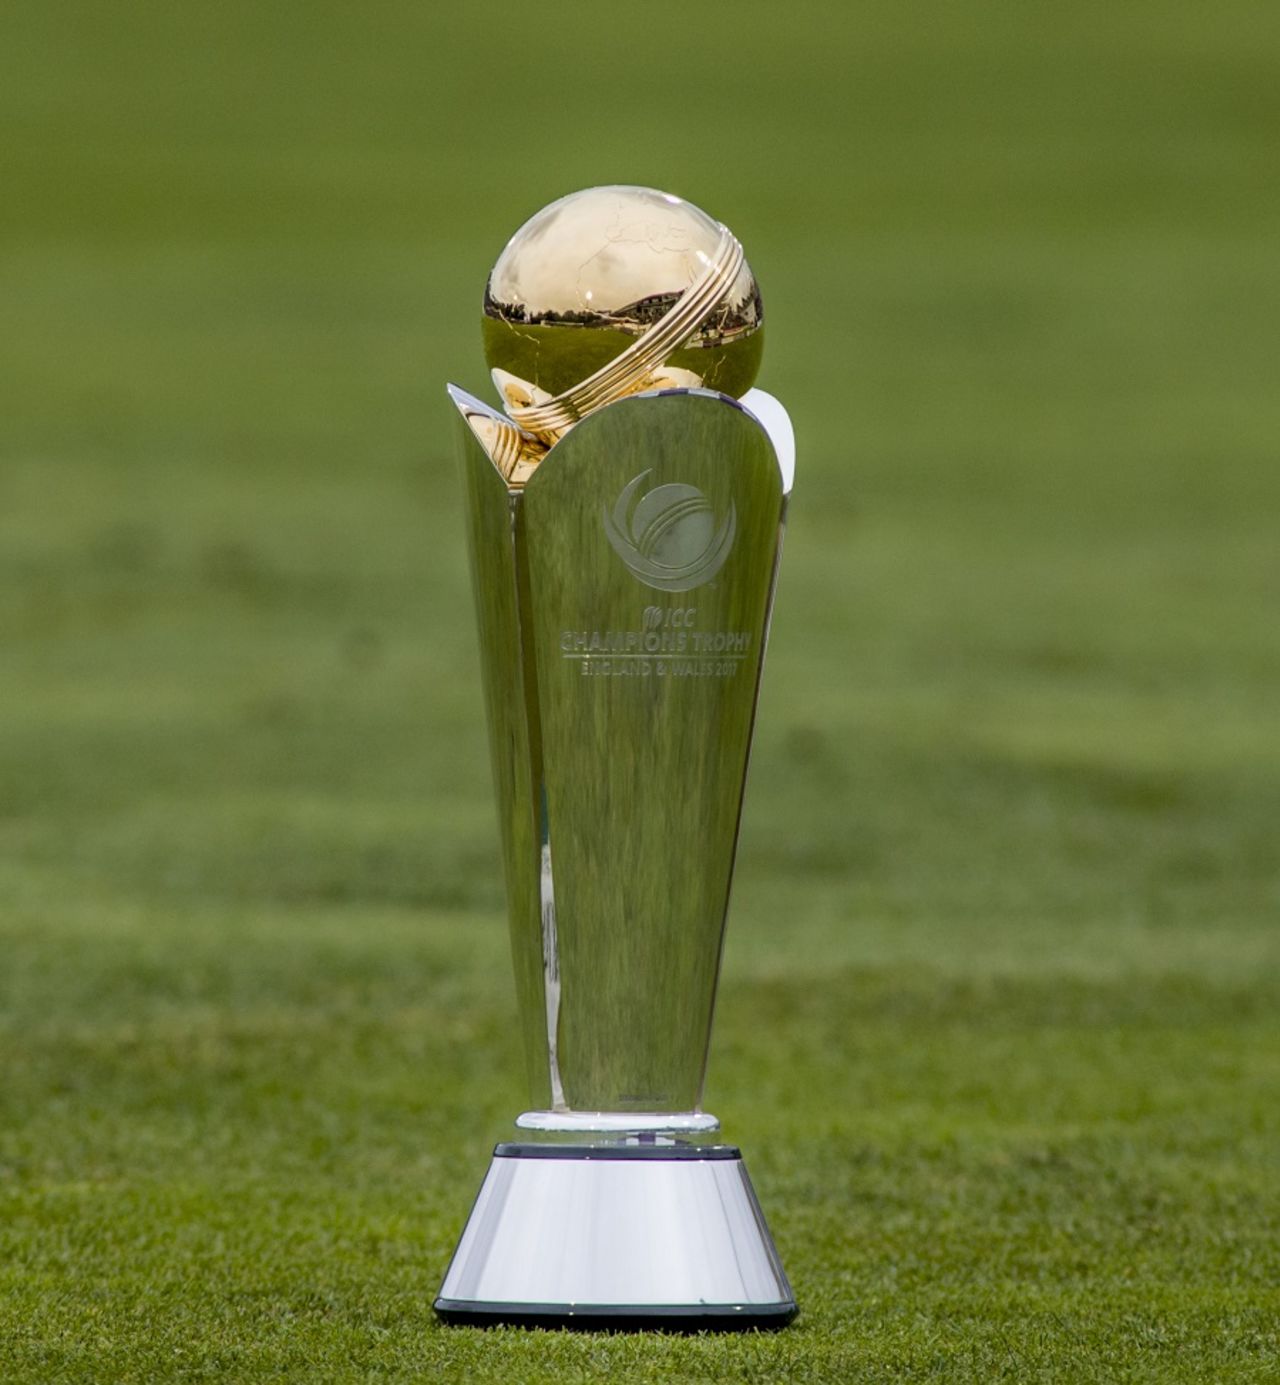 The ICC Champions Trophy on display, England v Pakistan, 5th ODI, Cardiff, September 4, 2016